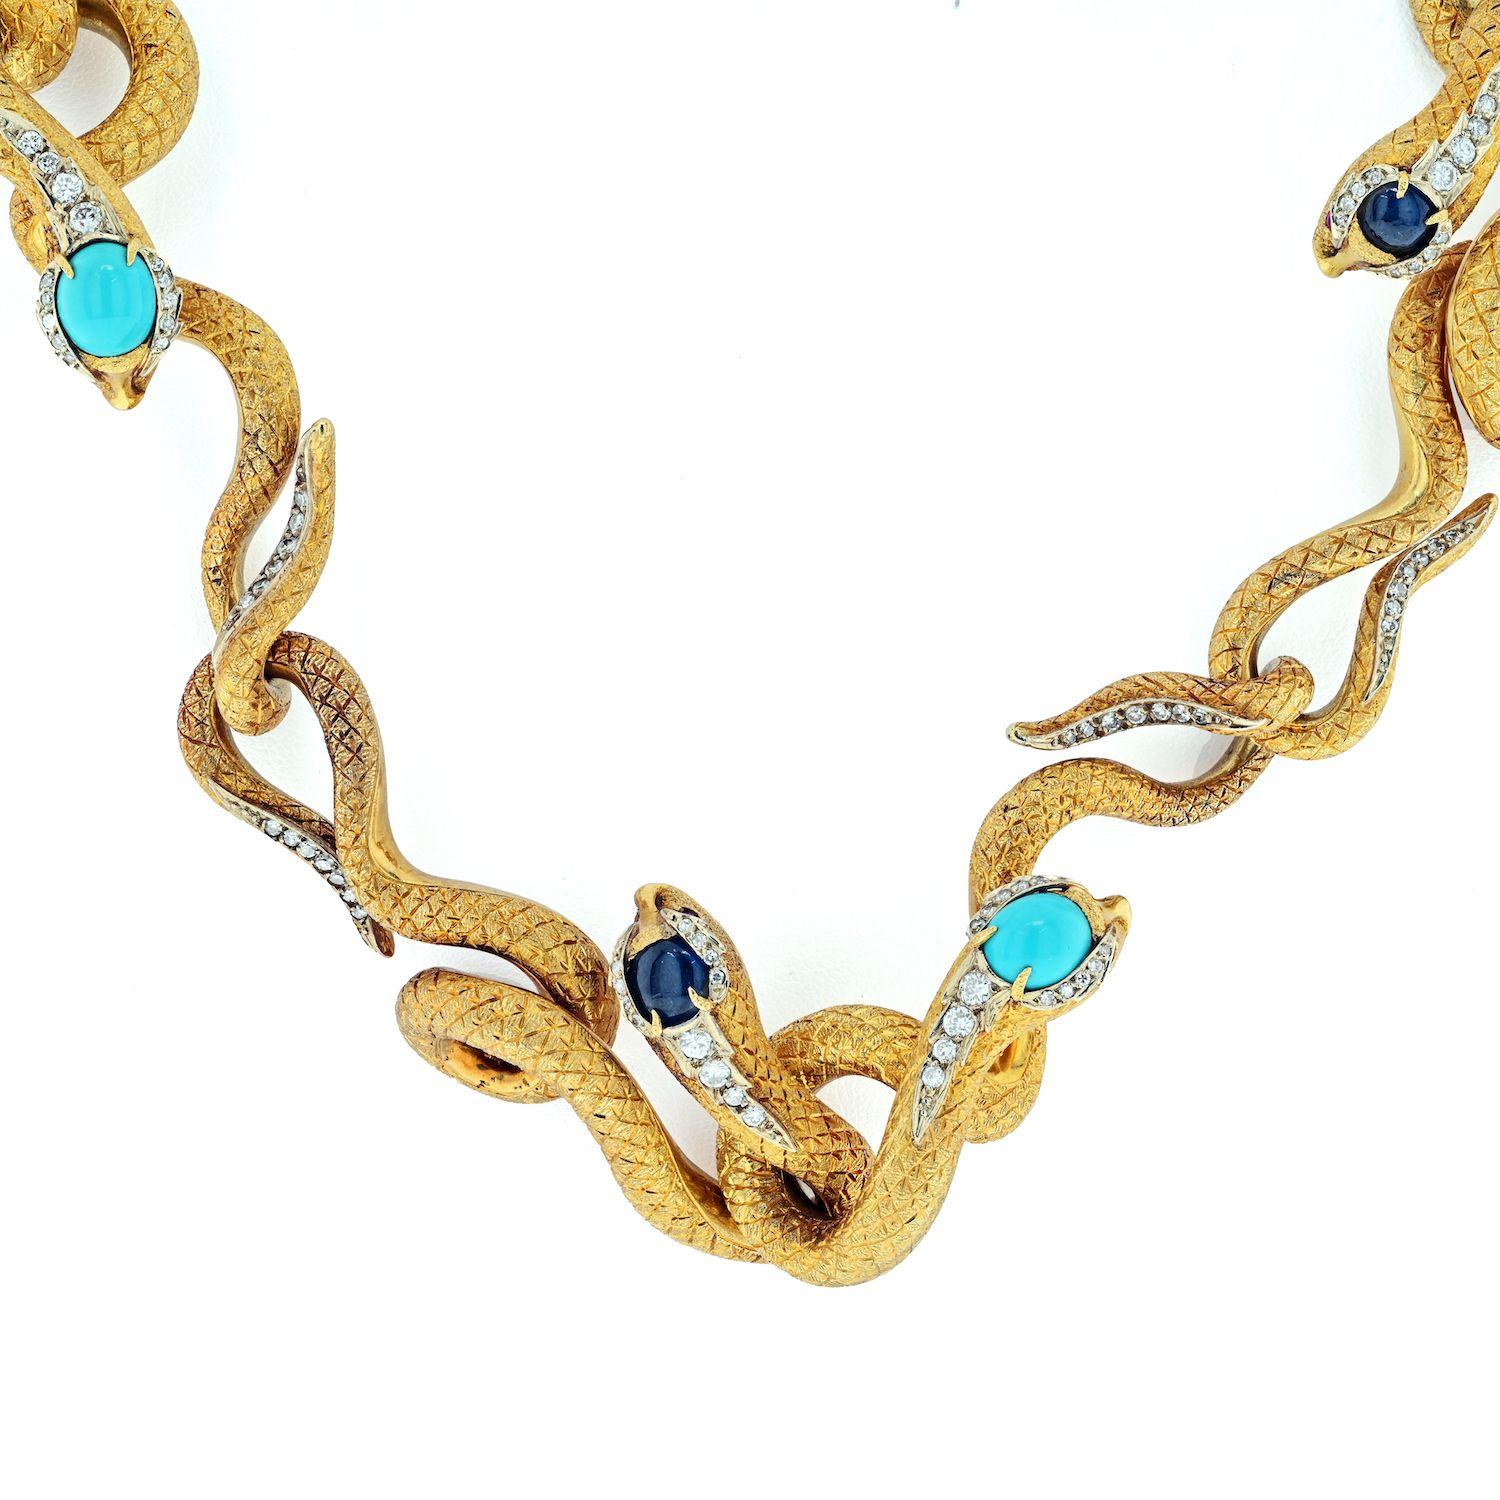 A very unusual 18k yellow gold necklace with articulated snakes. A significant necklace in weight it is 315  in grams. 

Full circle there are 14 handmade snakes with ruby eyes, turquoise or lapis atop its head along with accents of diamonds on the